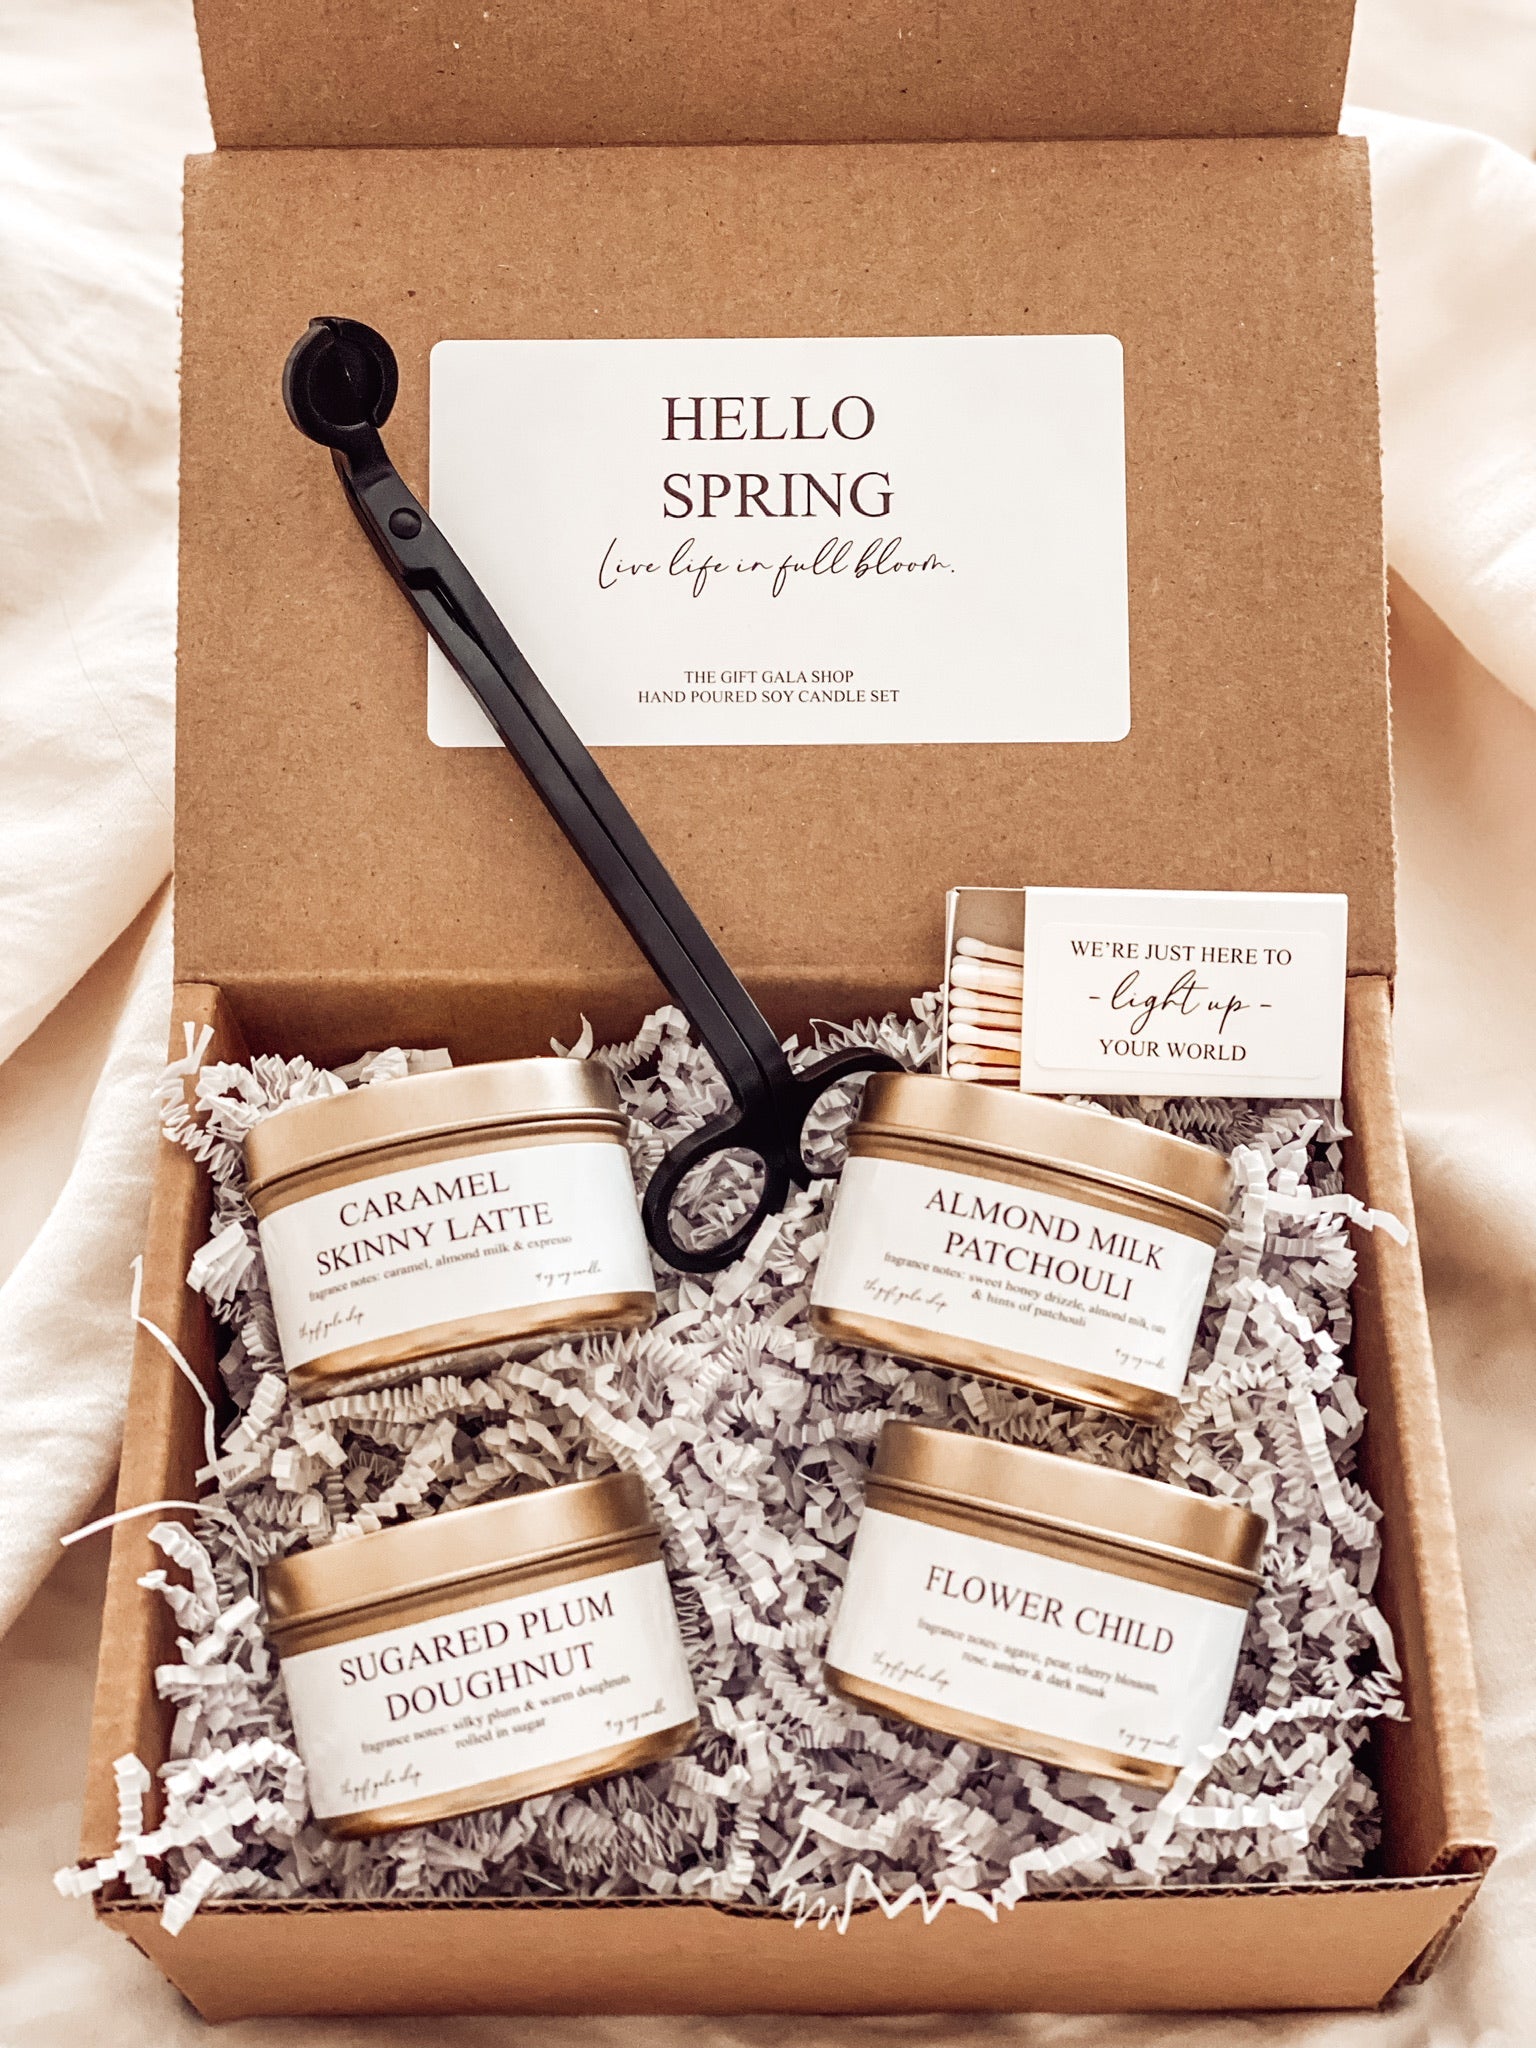 10 Amazing Sample Boxes You Can Get Delivered Each Month